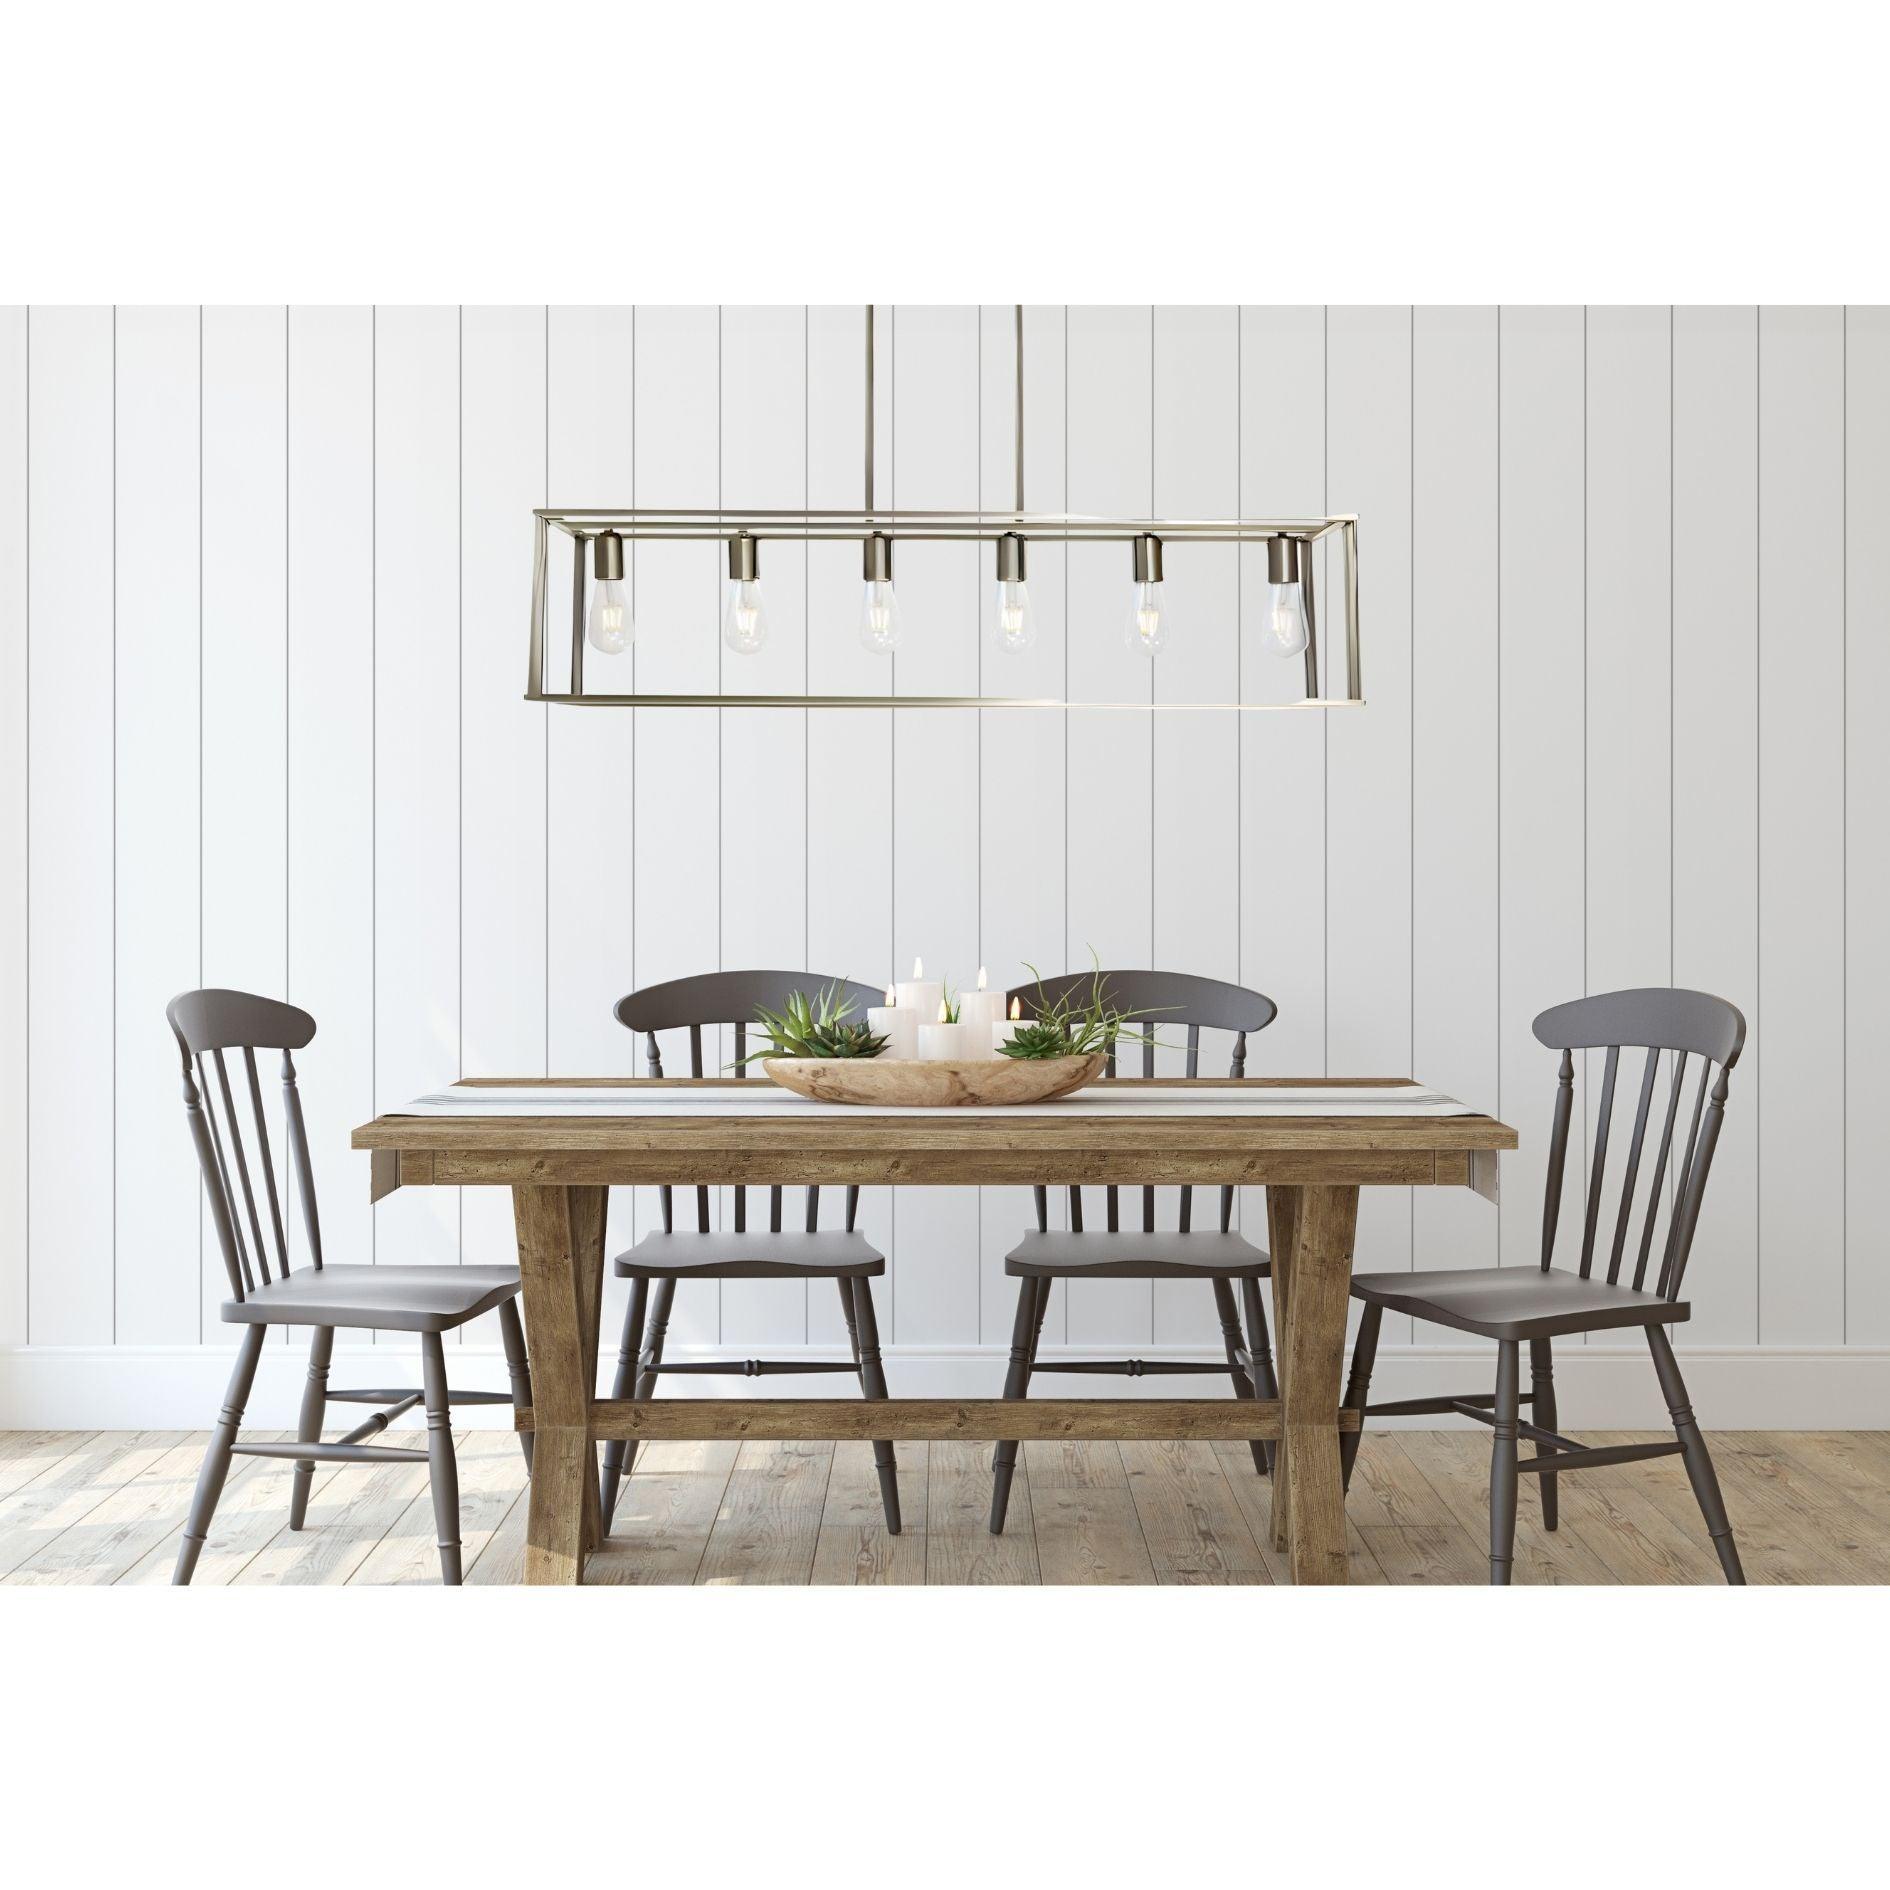 🆓🚛 6 Light Rectangle Chandelier Contemporary Farmhouse Linear Pendant Lighting Brushed Nickel Industrial Vintage Kitchen Island Metal Cage Ceiling Light Fixture